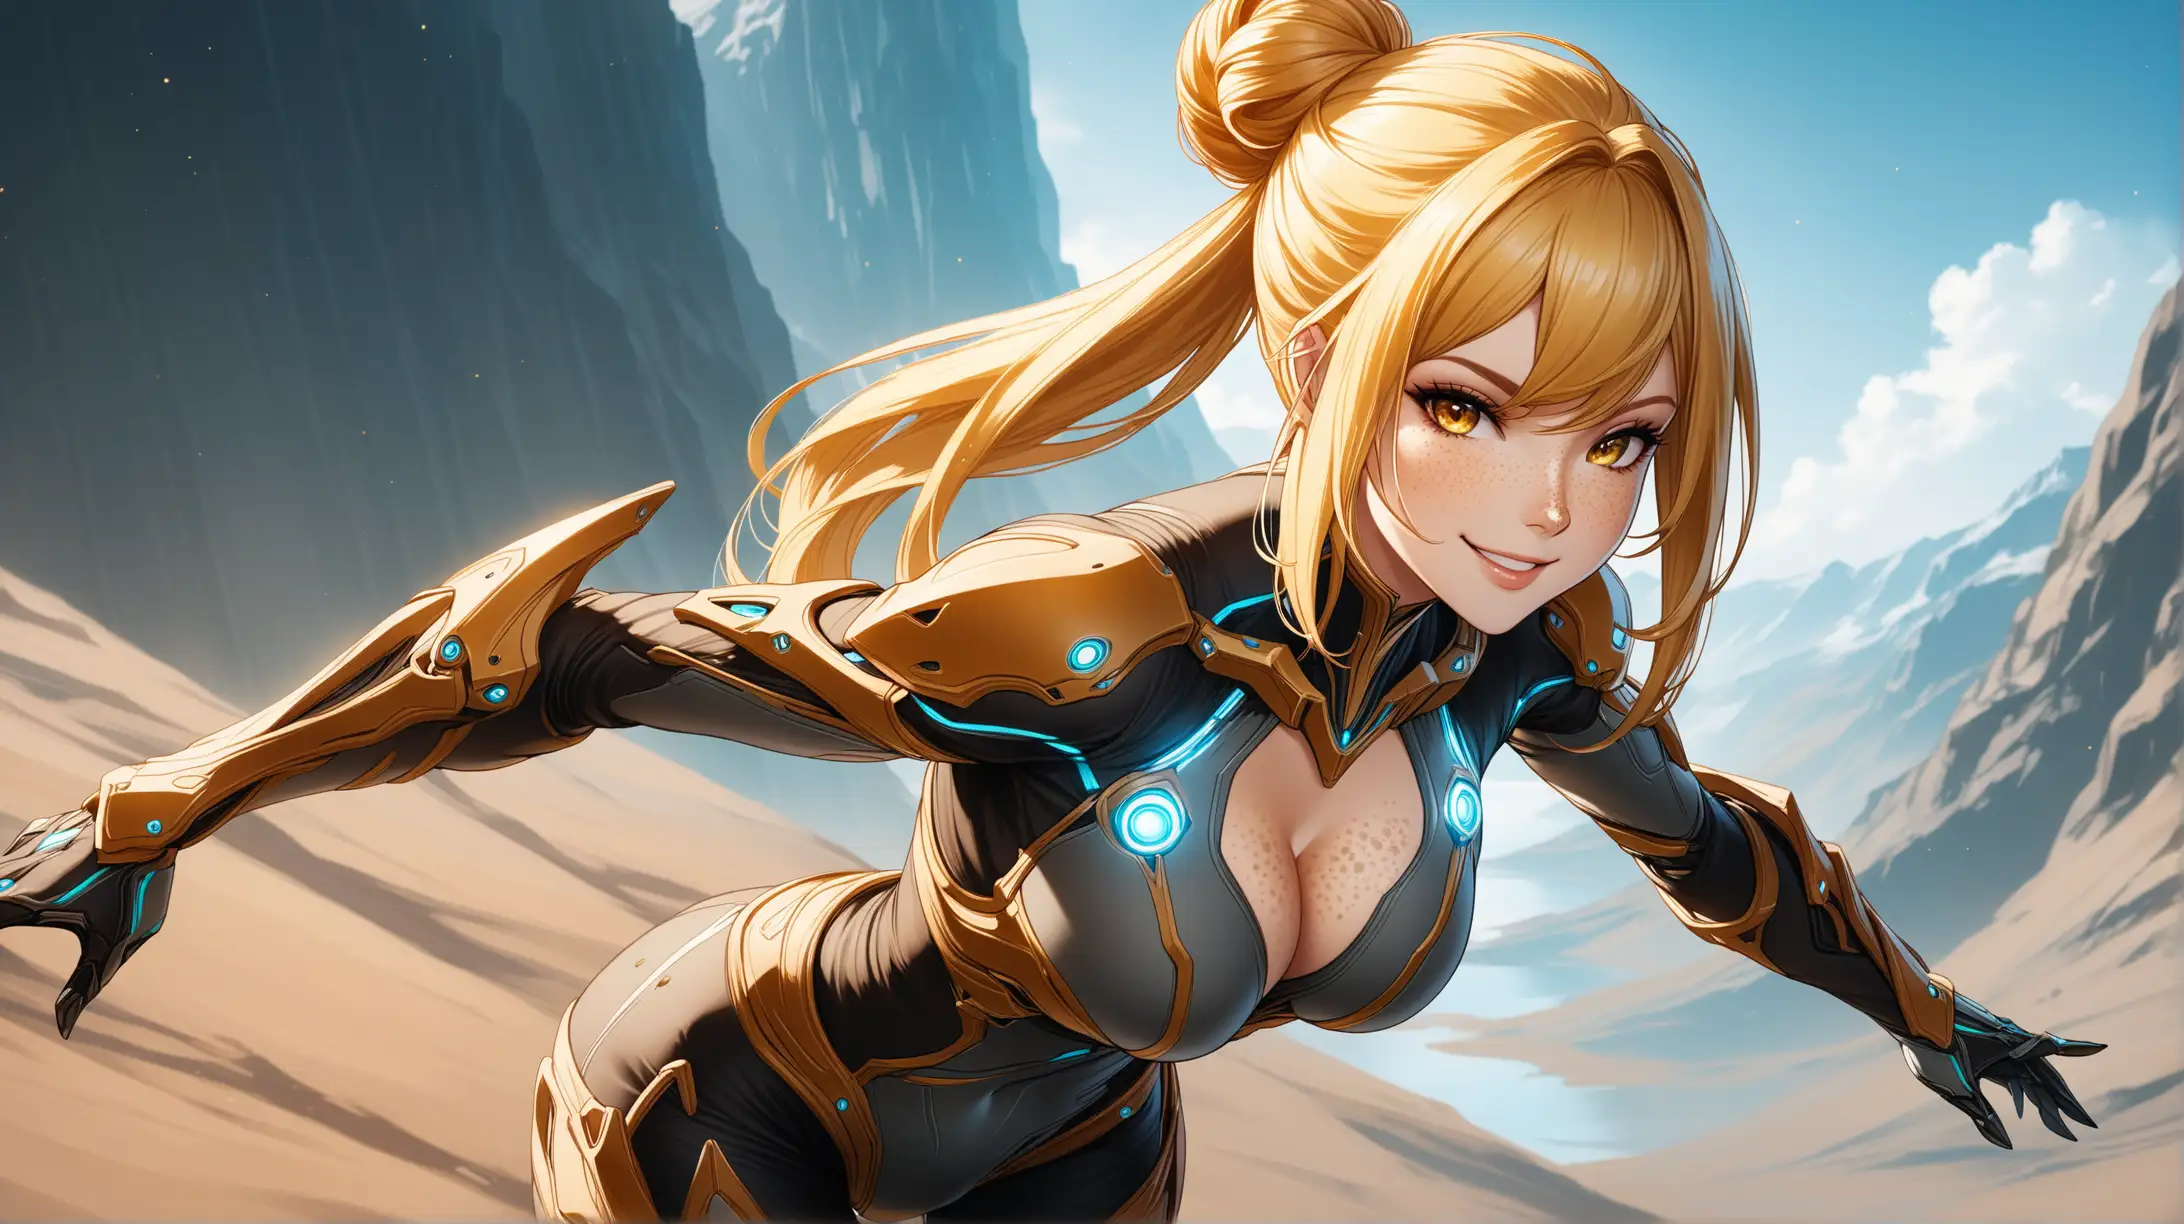 Draw a woman, long blonde hair in a bun, gold eyes, freckles, perky figure, outfit inspired from the game Warframe, high quality, long shot, outdoors, dynamic pose, seductive, cleavage, natural lighting, smiling at the viewer